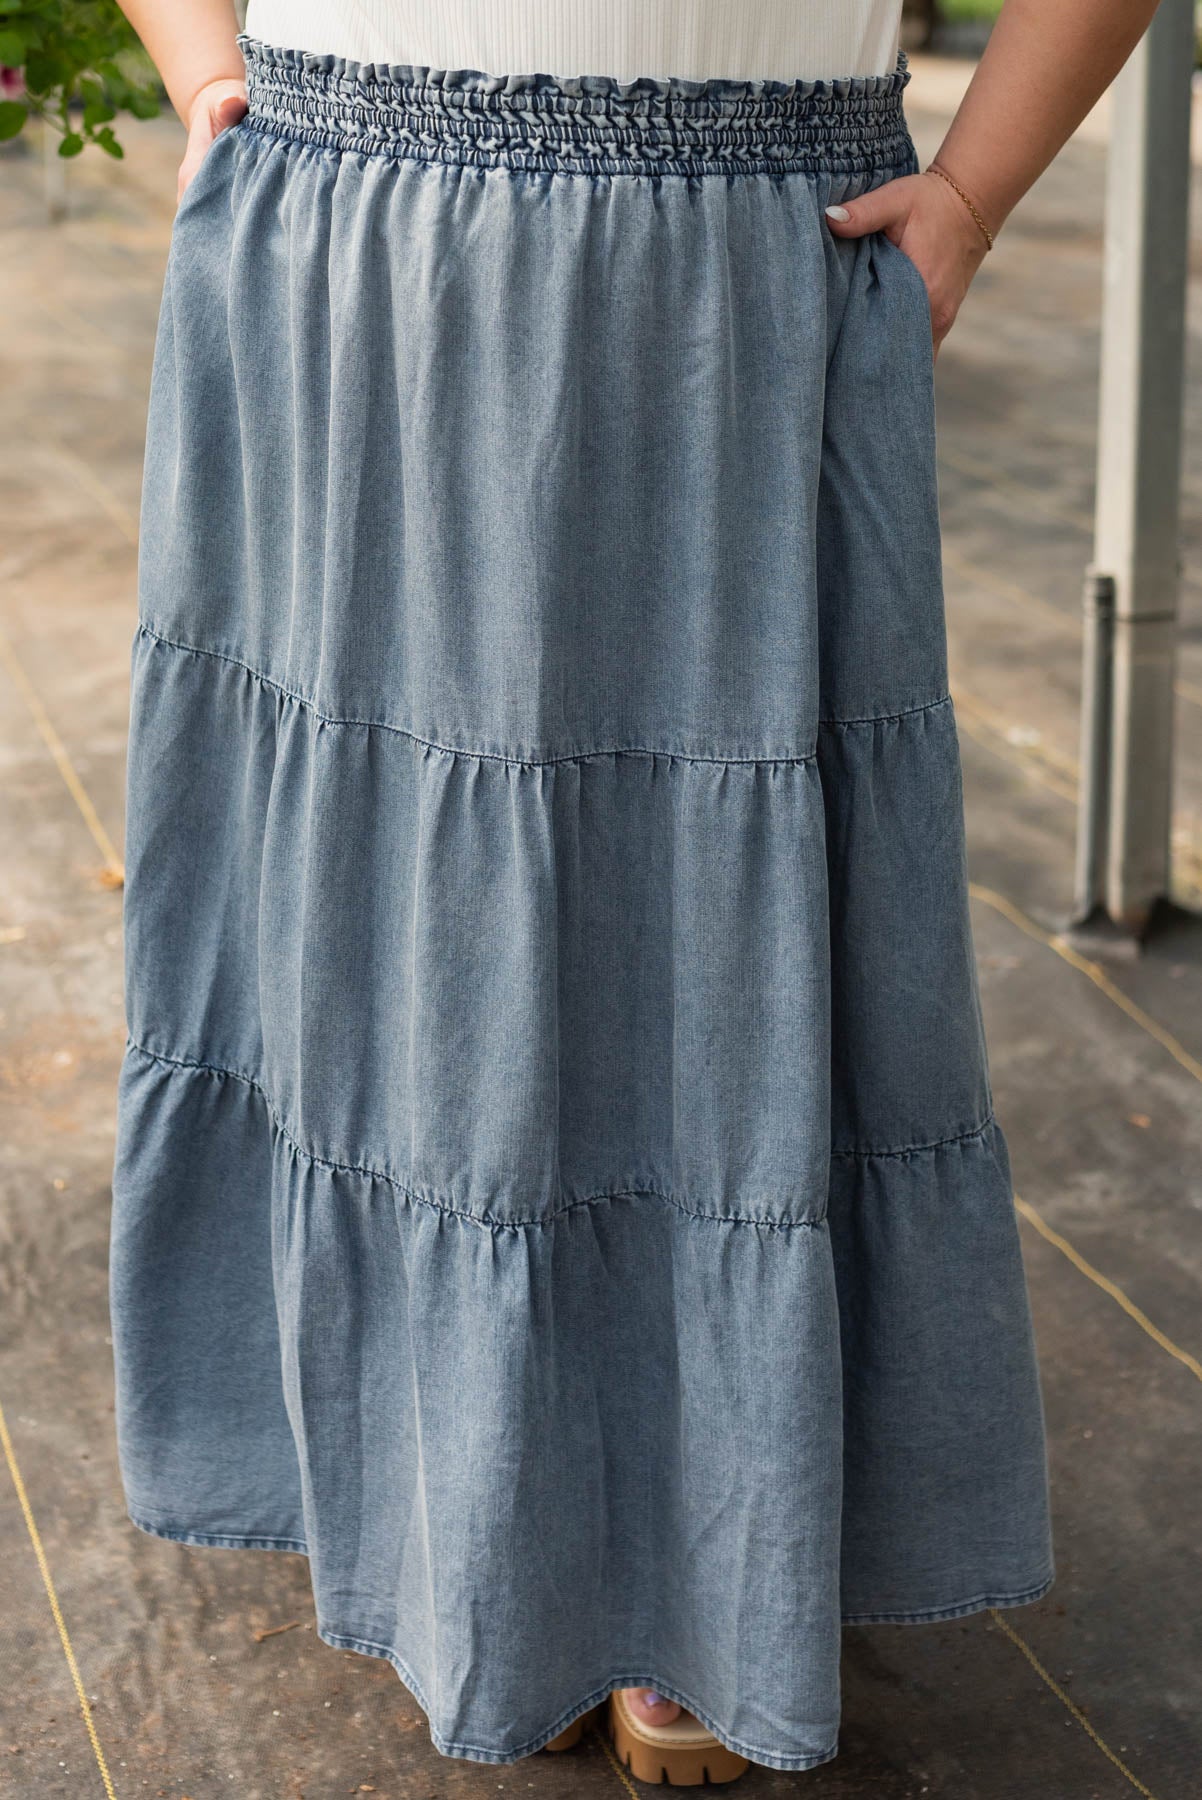 Denim blue tiered skirt with elastic waist and pockets